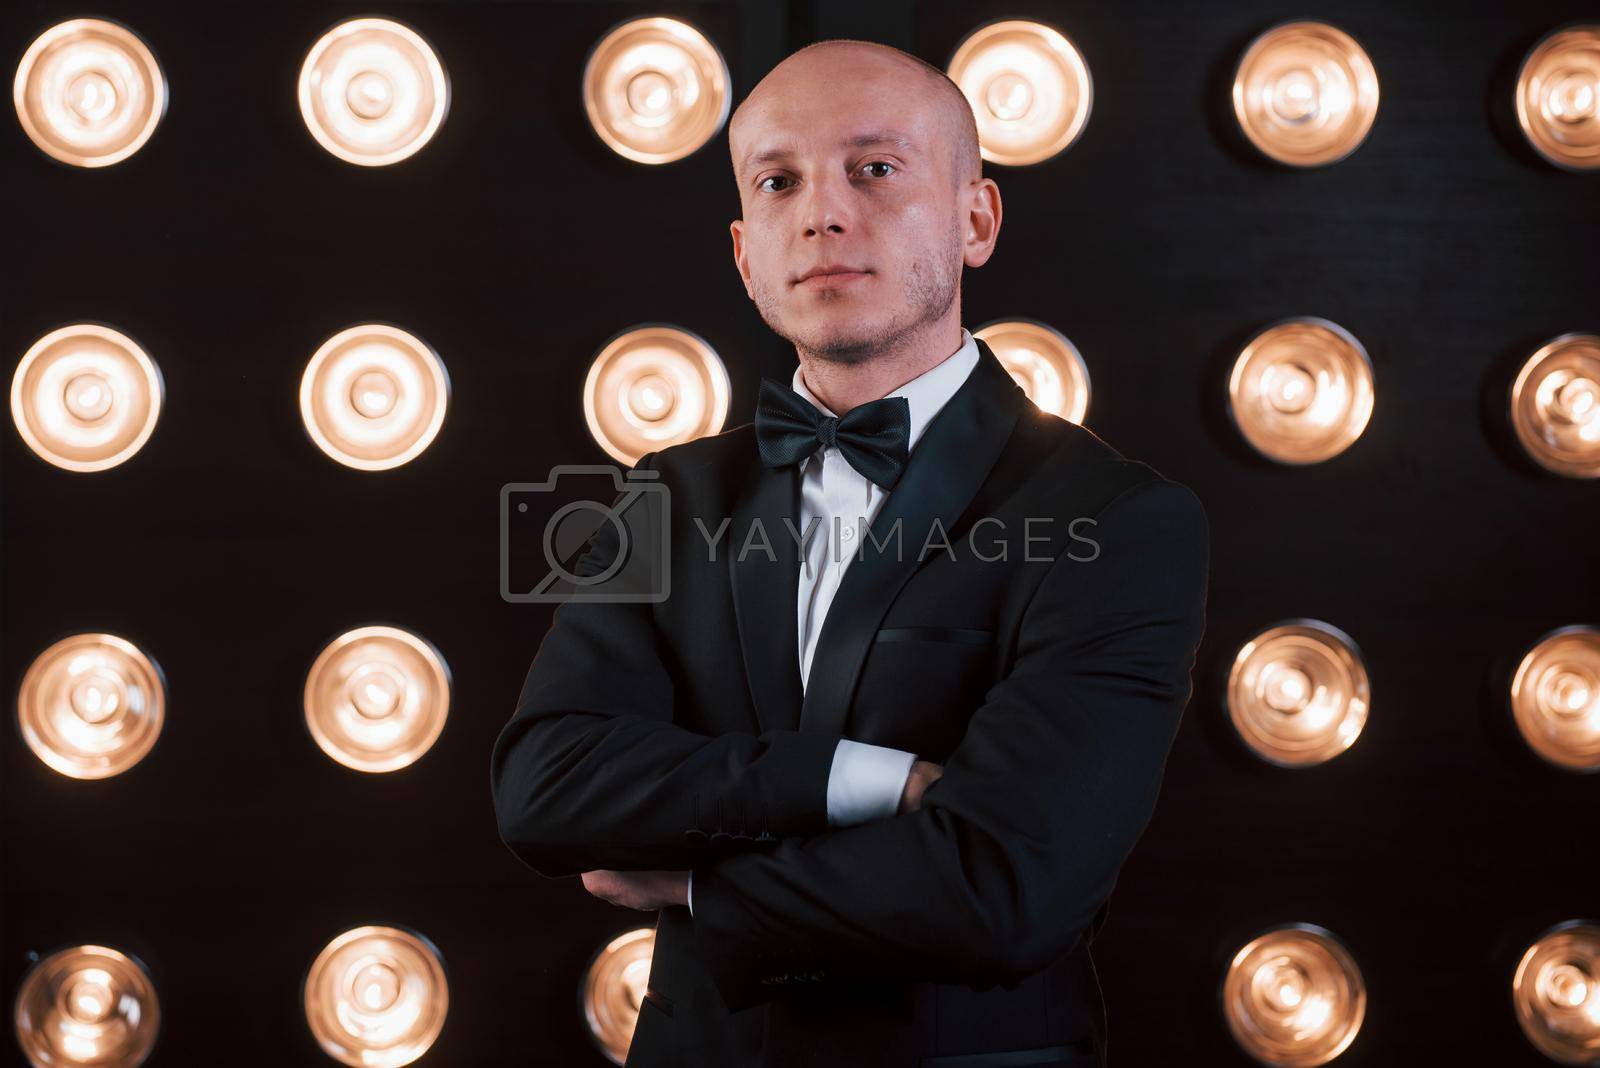 Royalty free image of Nice portrait of professional illusionist. Magician in black suit standing in the room with special lighting at backstage by Standret